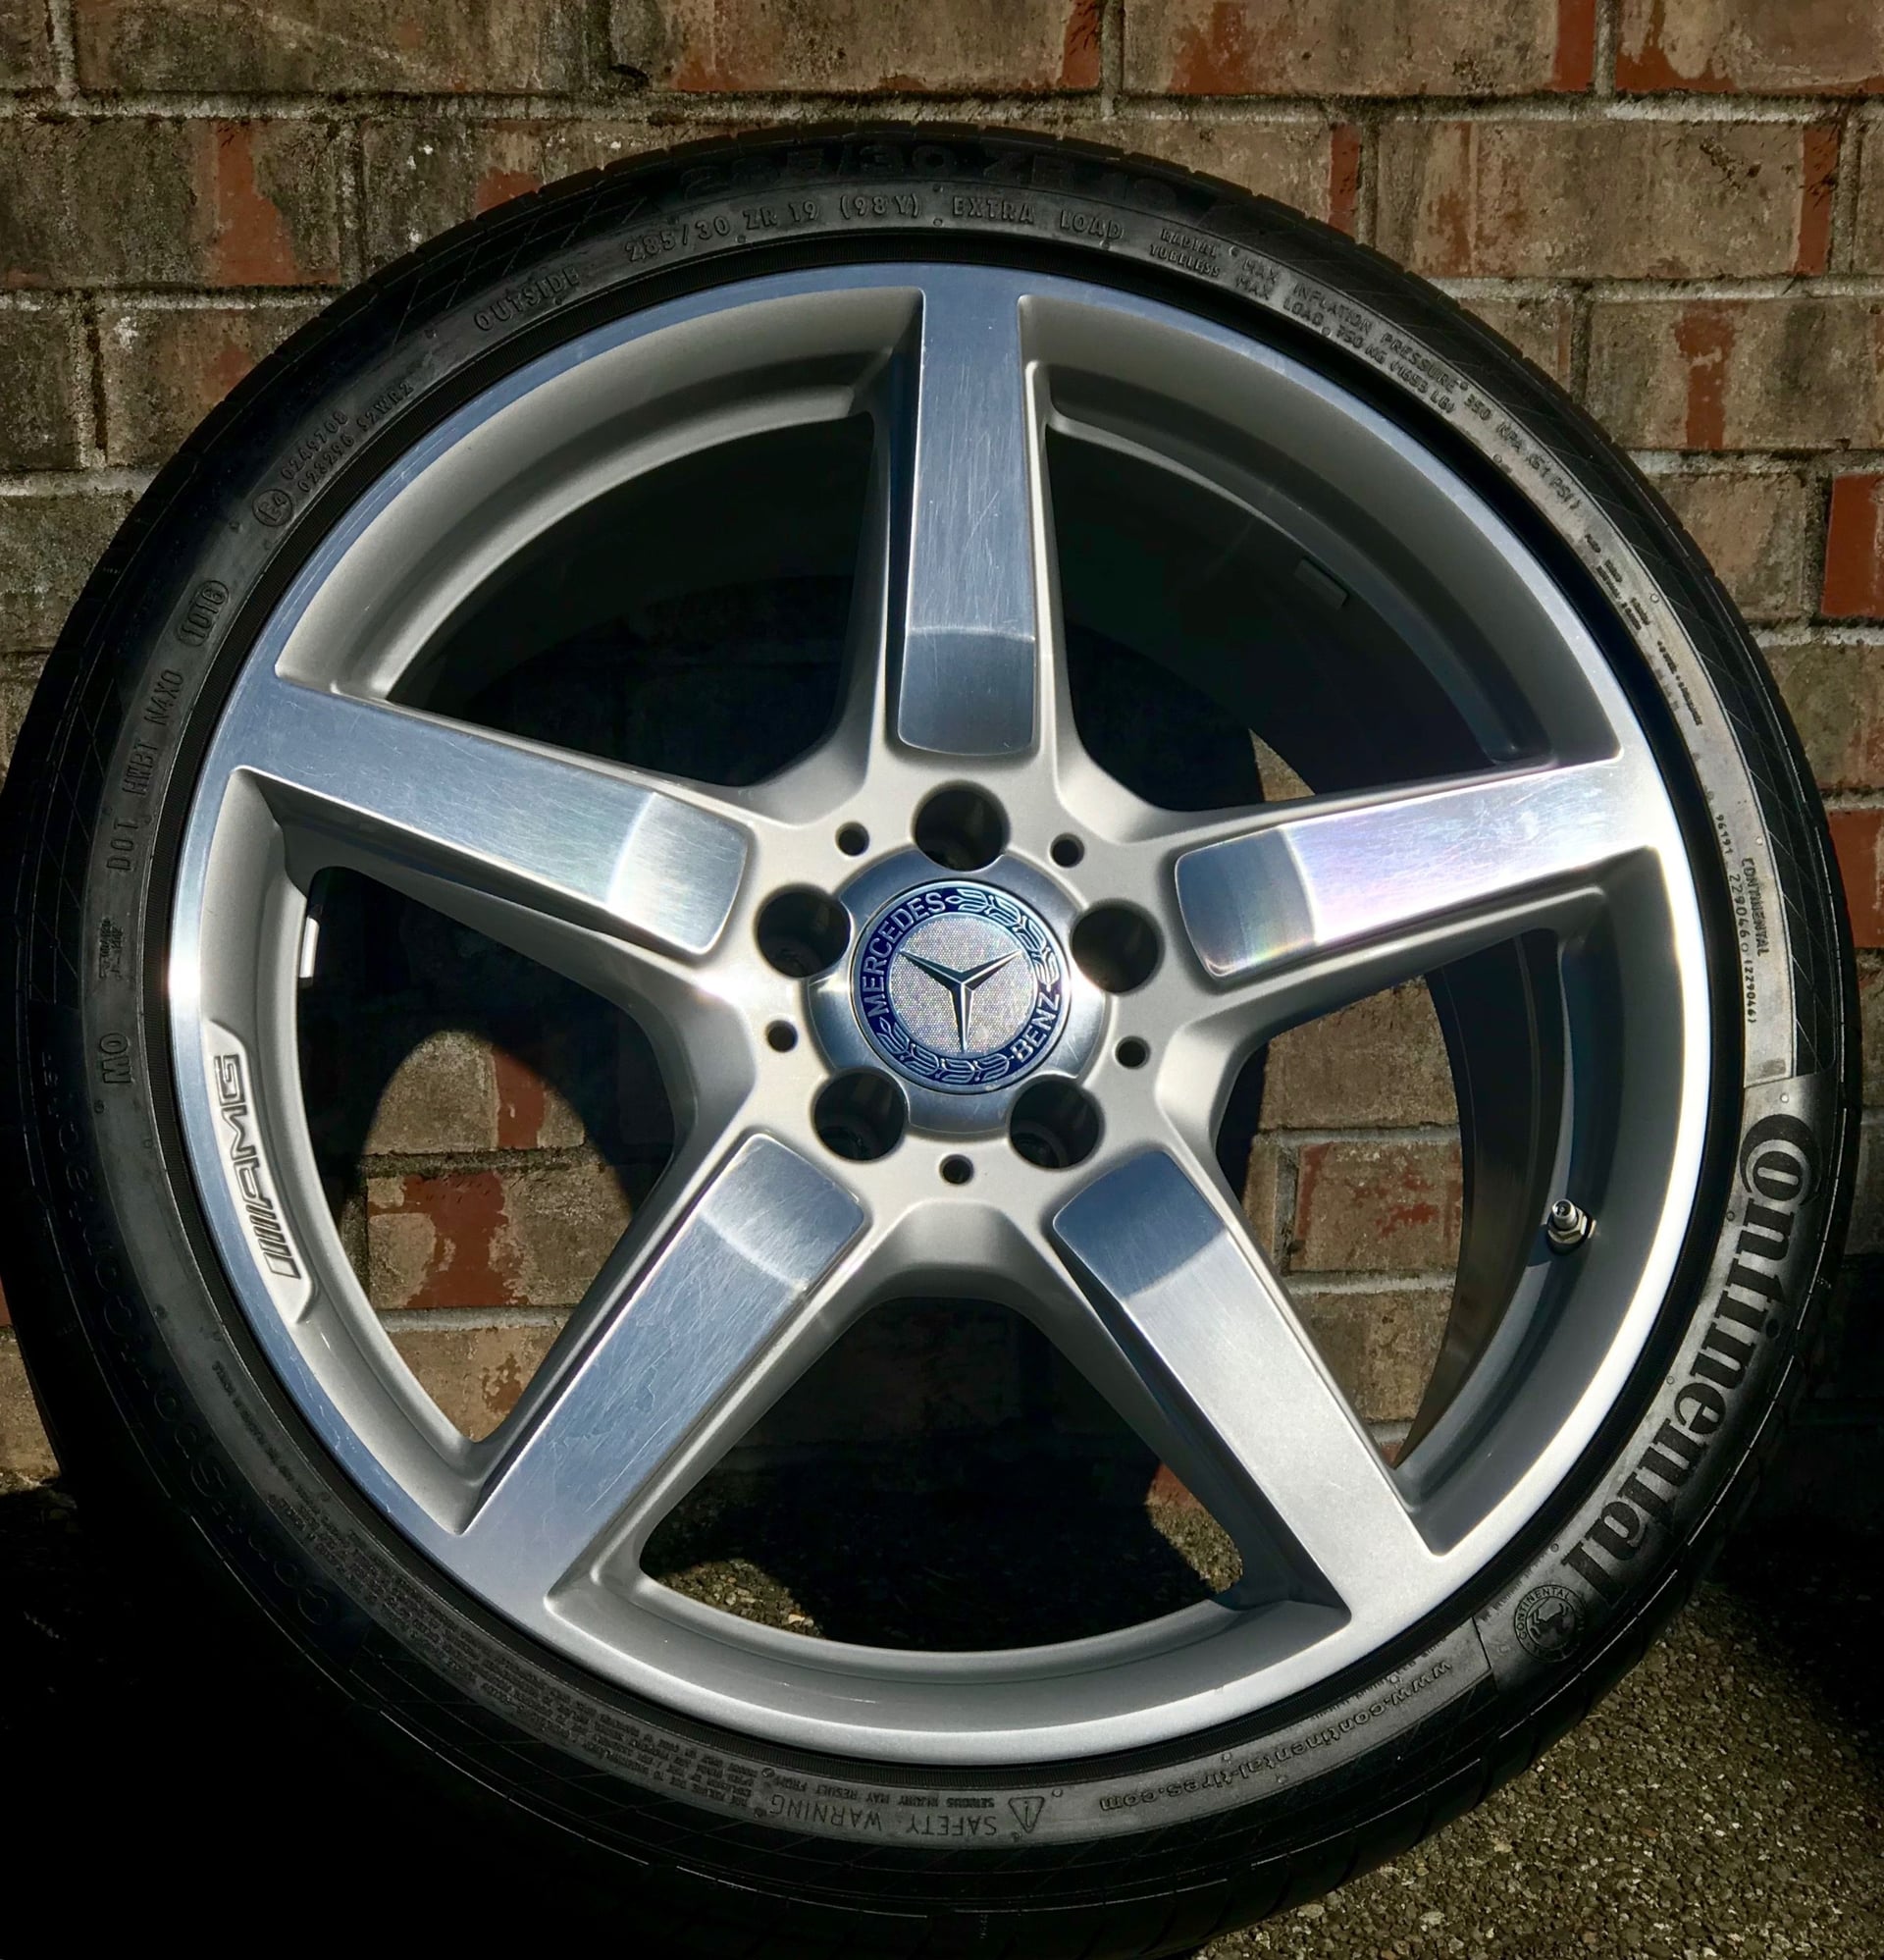 Wheels and Tires/Axles - 19" AMG STAGGERED WHEELS - Used - 2012 to 2018 Mercedes-Benz CLS550 - Gig Harbor, WA 98335, United States